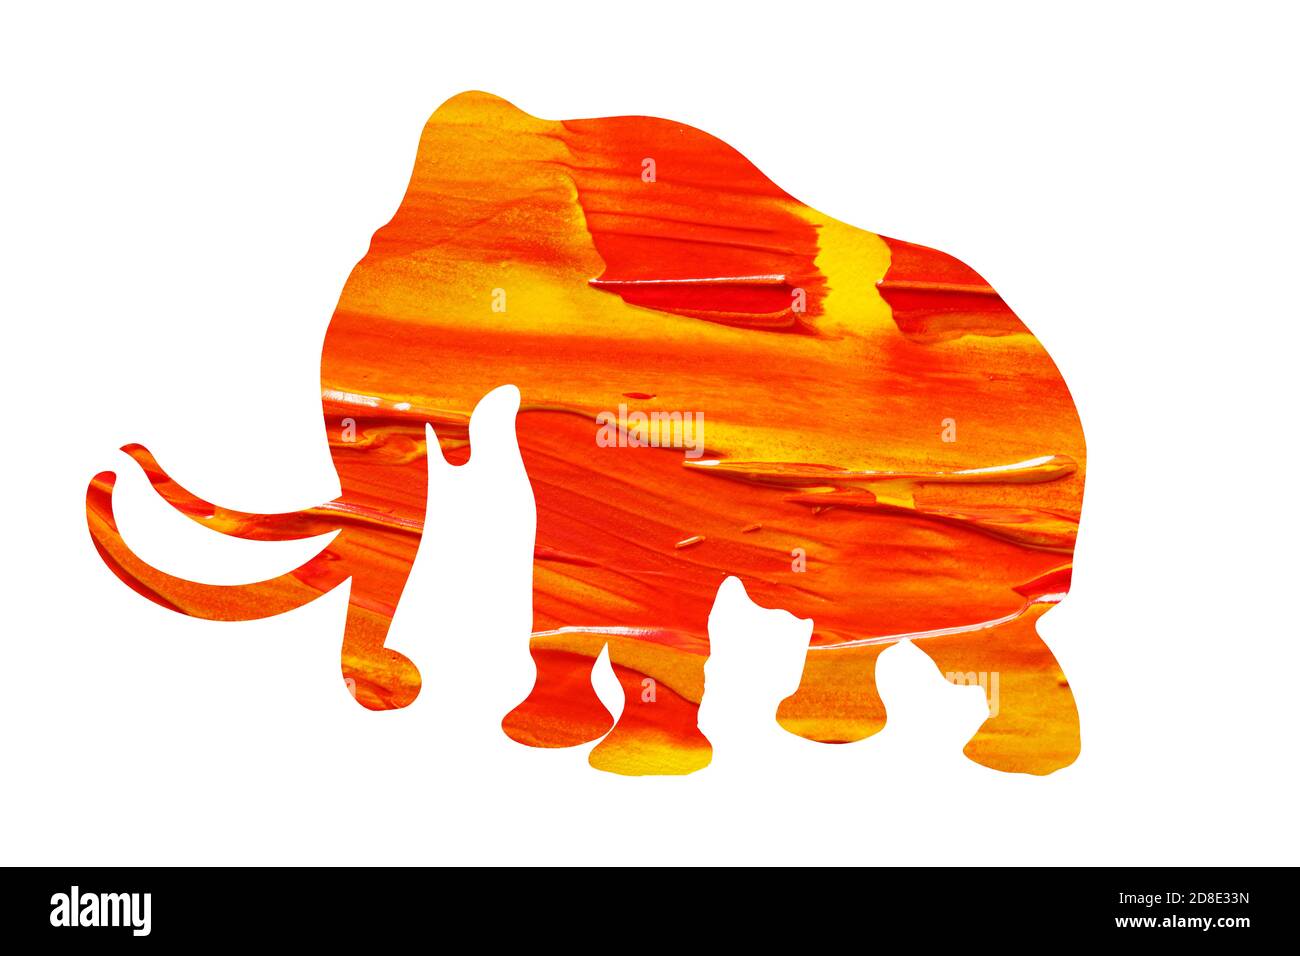 elephant silhouette with color paint texture isolated on white background Stock Photo